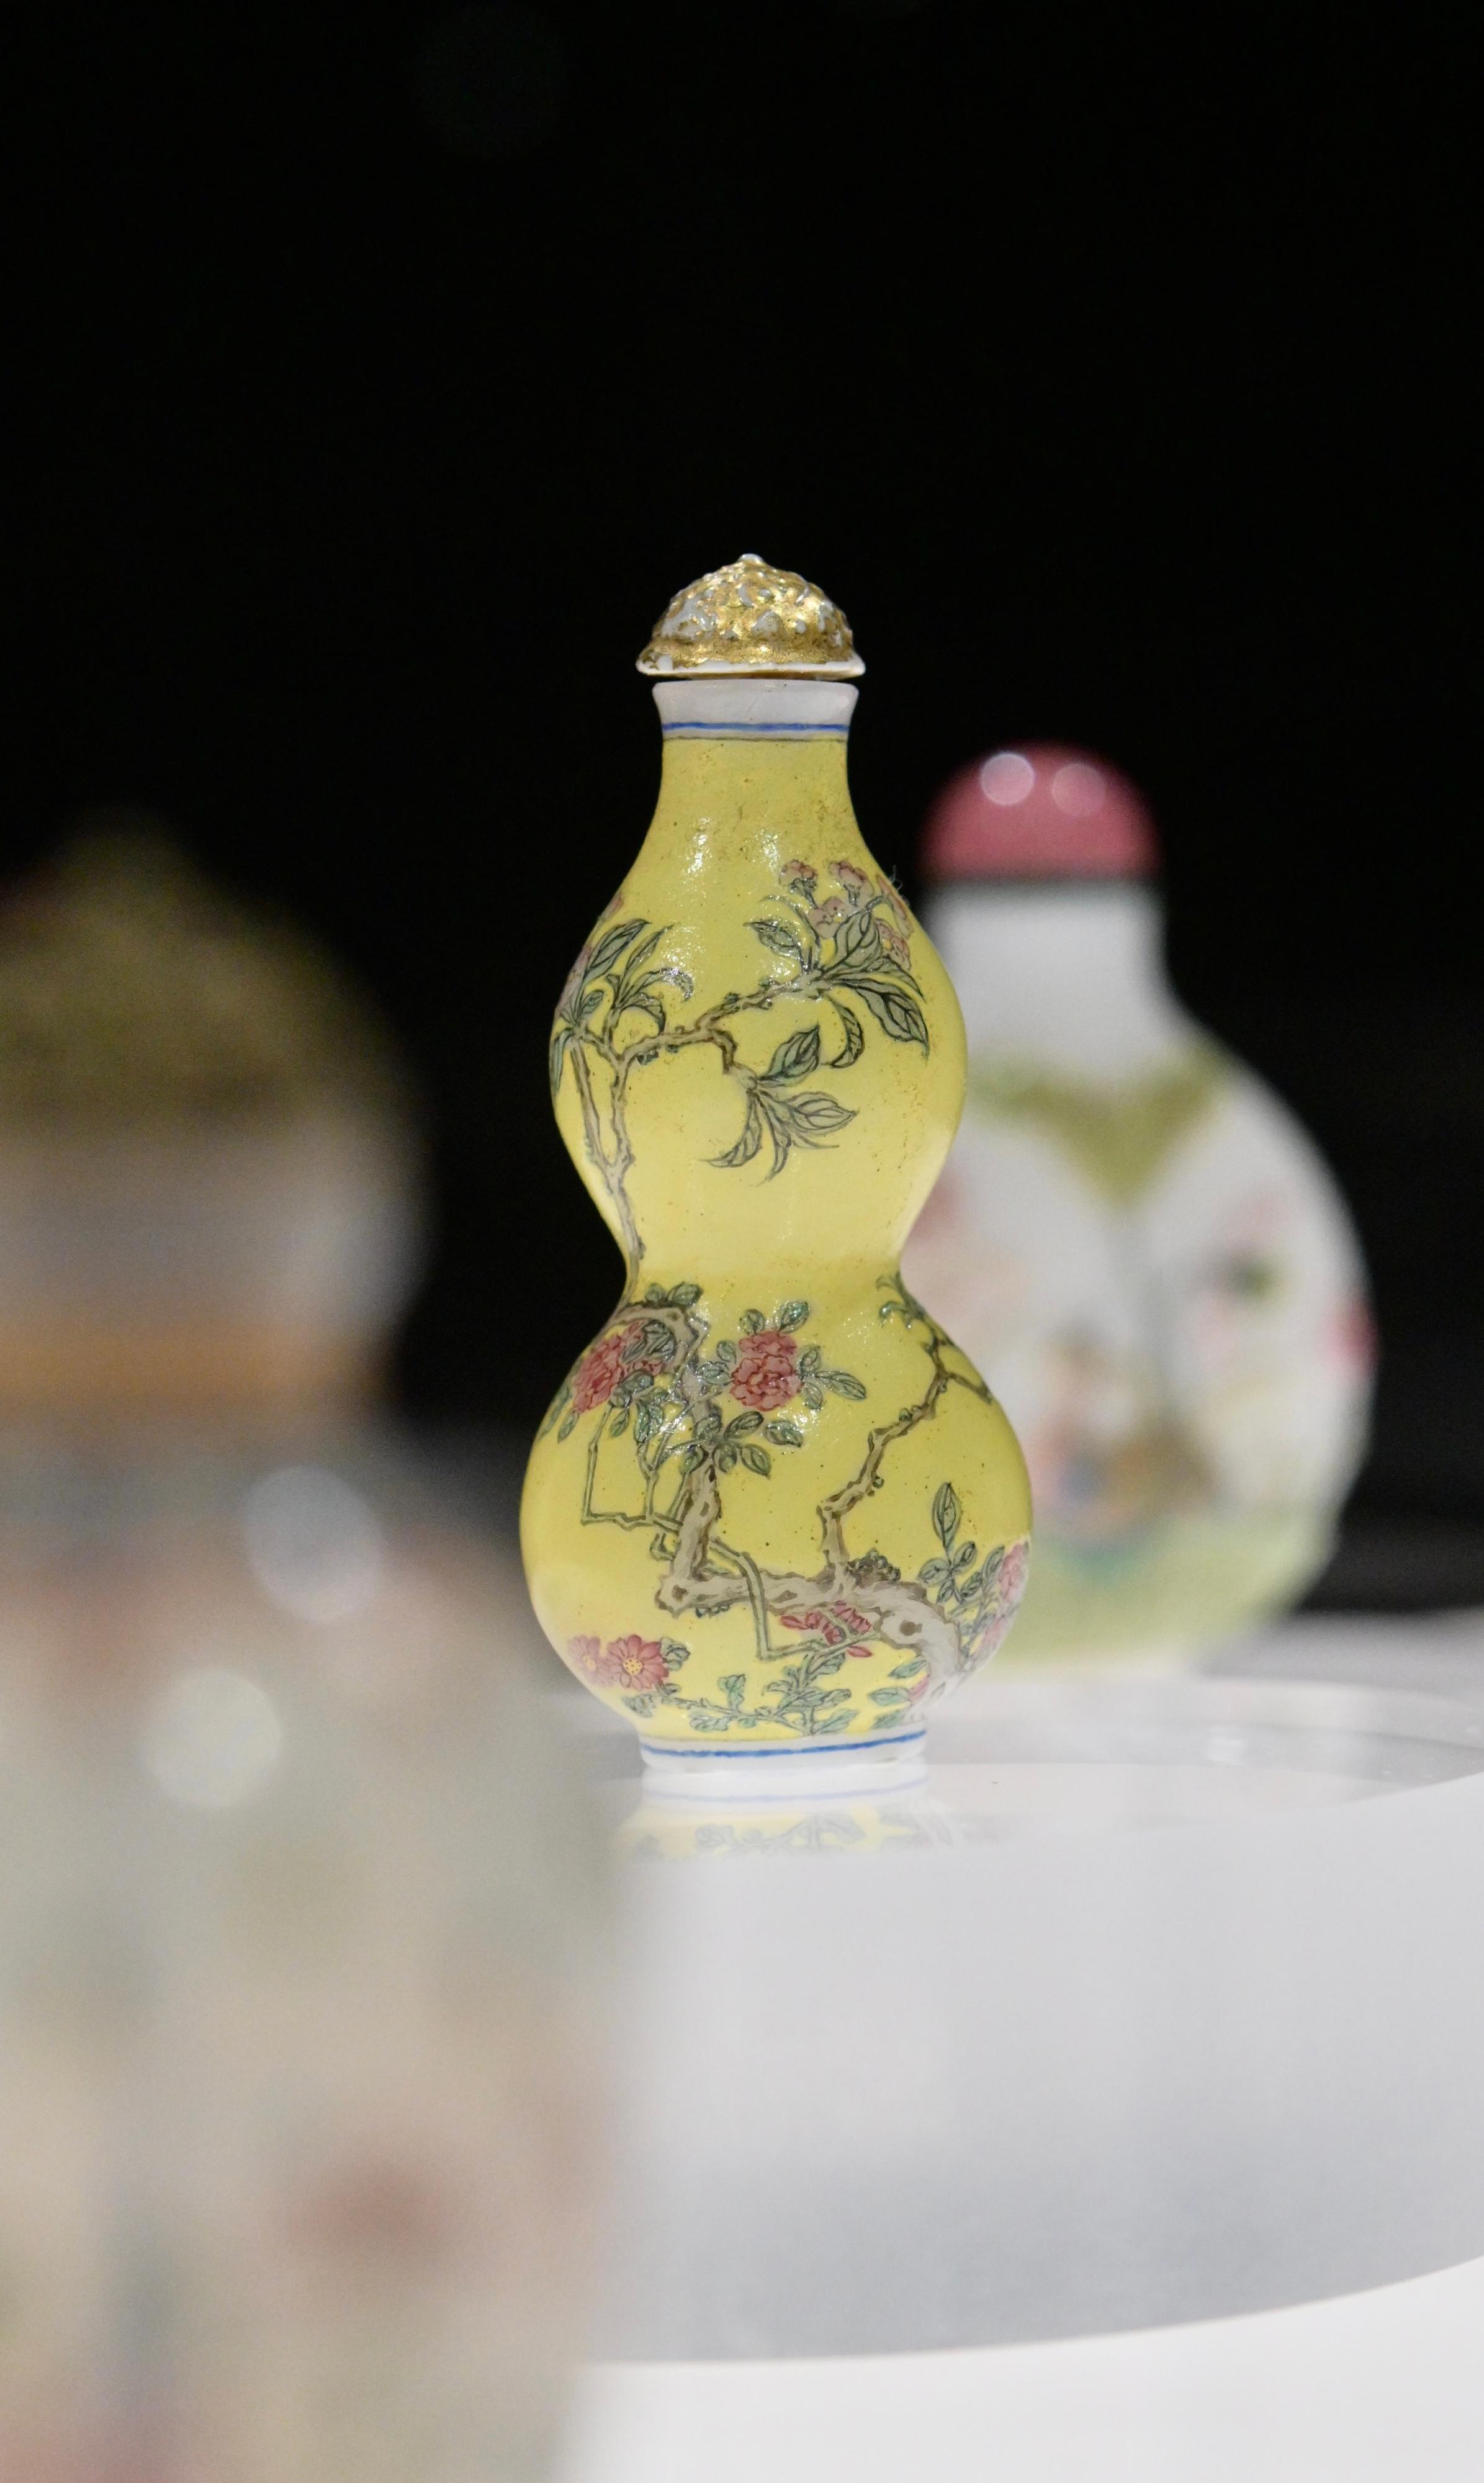 The opening ceremony of the "Art of Gifting: The Fuyun Xuan Collection of Chinese Snuff Bottles" exhibition and donation ceremony was held today (April 11) at the Hong Kong Museum of Art. Photo shows a double-gourd-shaped snuff bottle with floral design in painted enamels on yellow ground.
